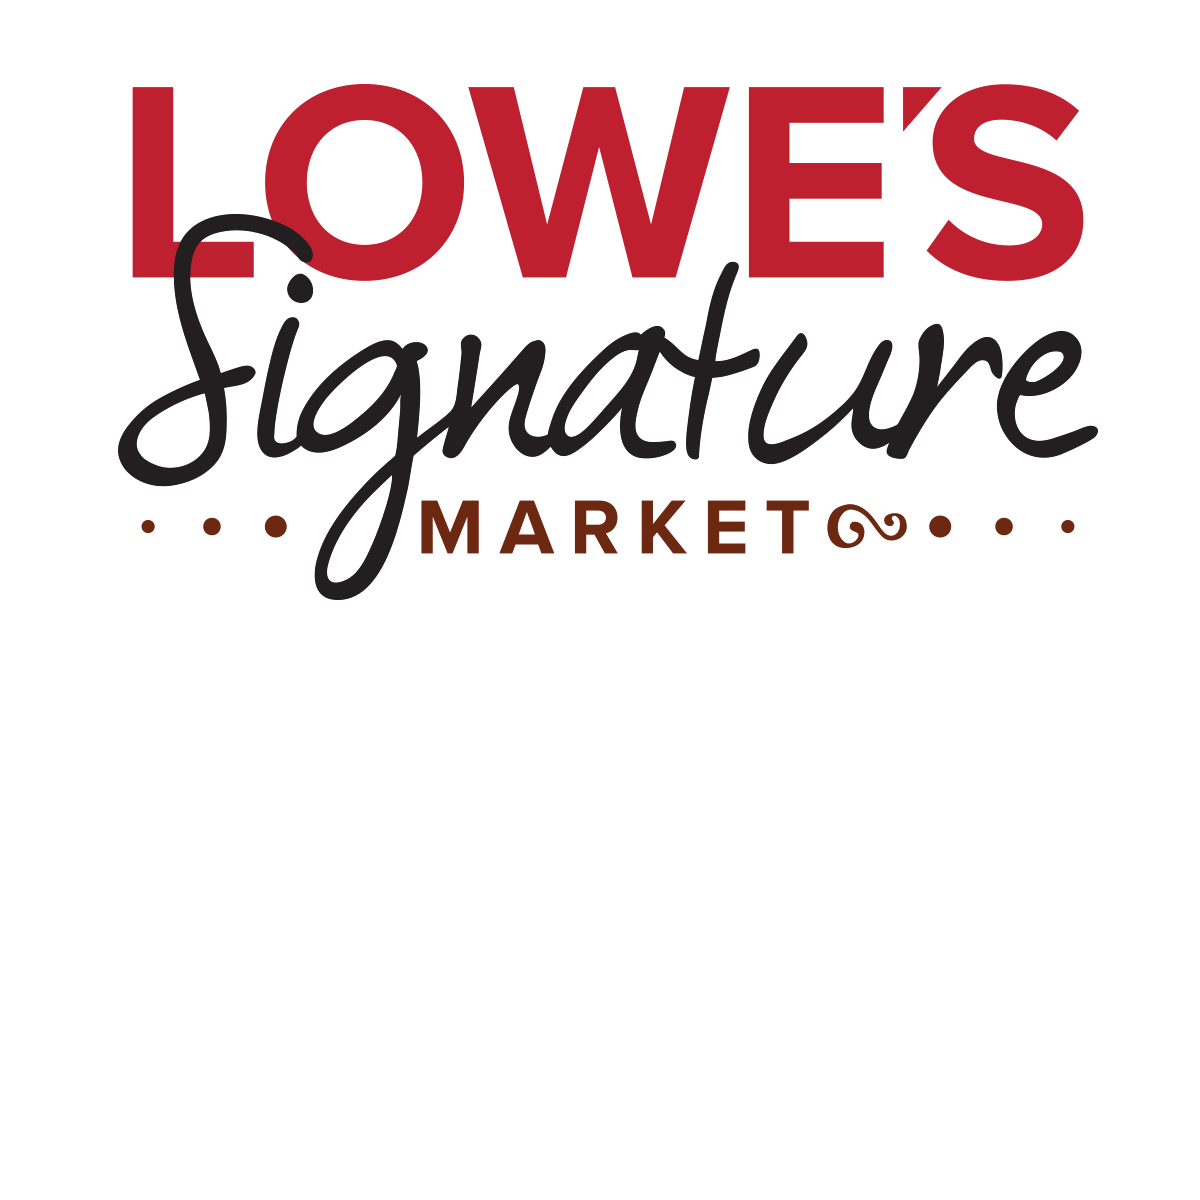 Lowe's Market – Grocery stores in Texas, New Mexico, Arizona